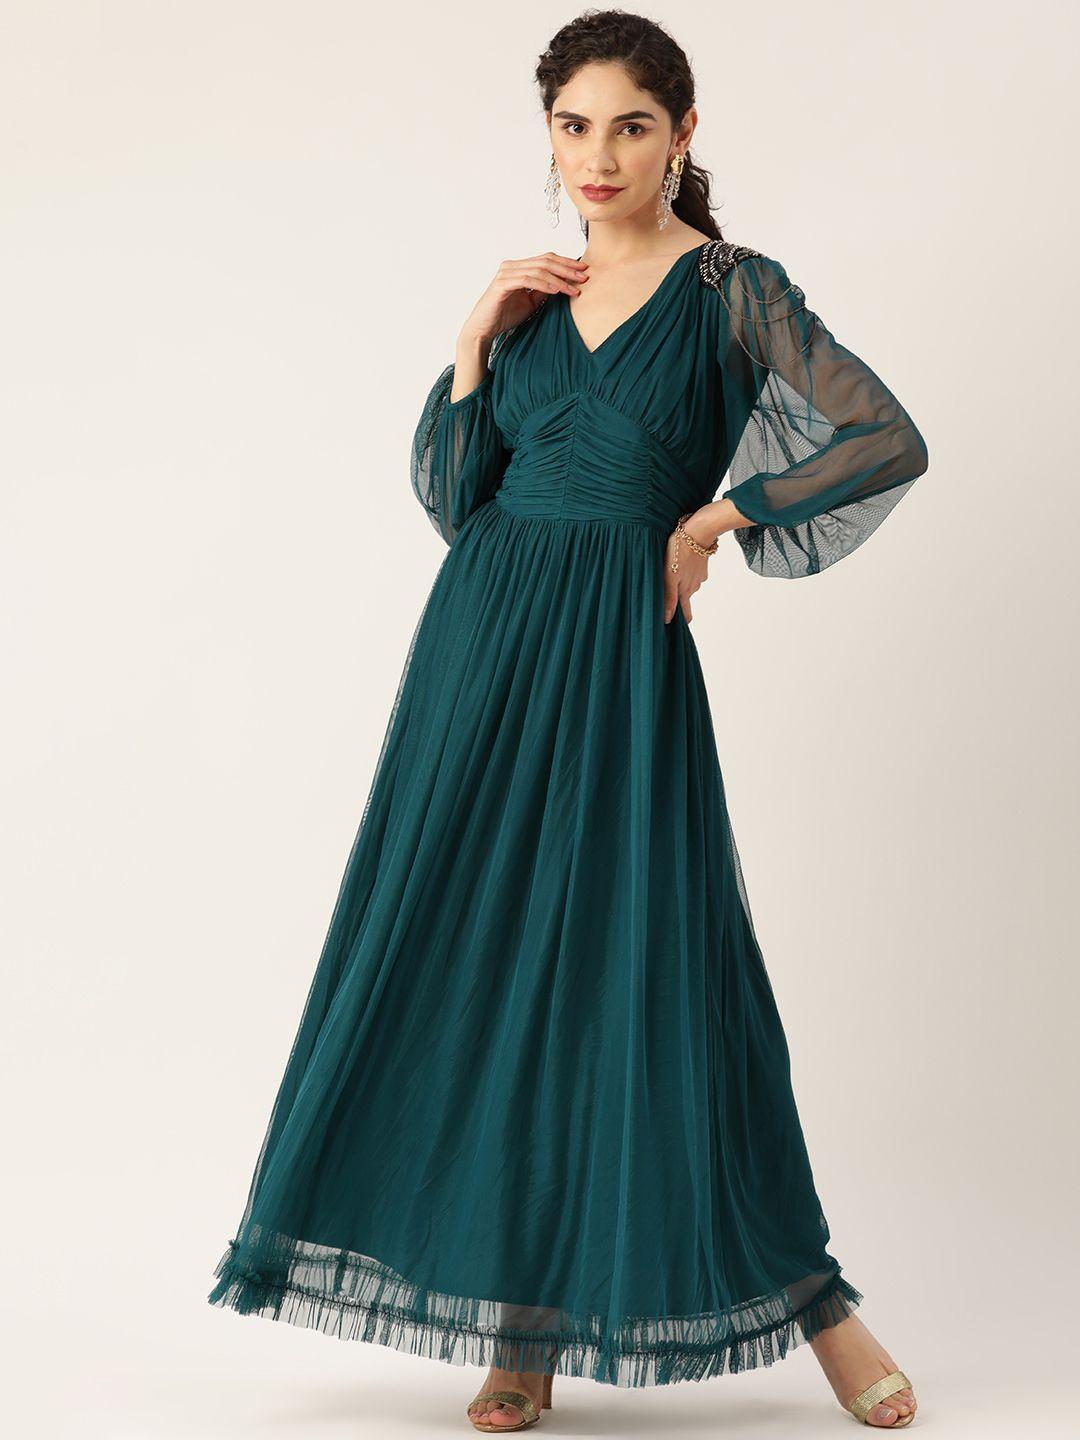 antheaa-teal-green-net-ruched-ethnic-maxi-dress